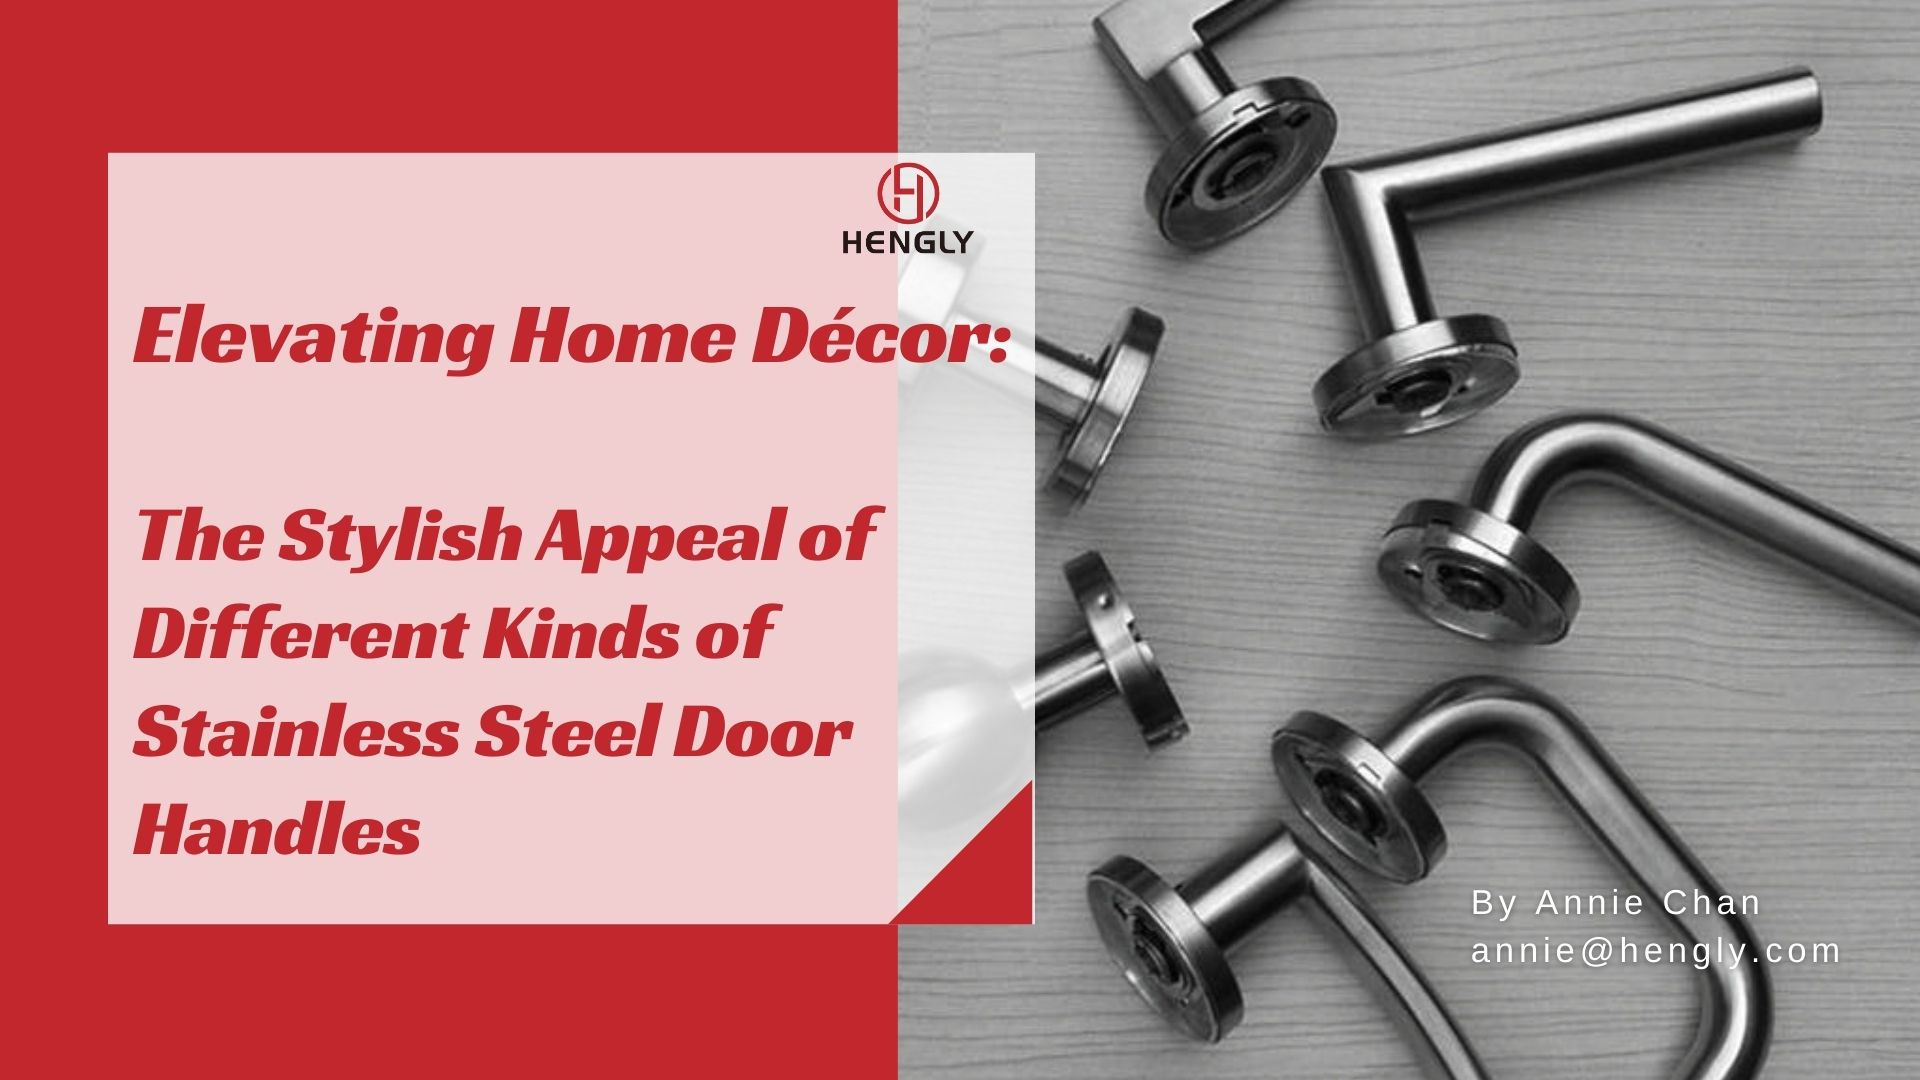 Elevating Home Décor: The Stylish Appeal of Different Kinds of Stainless Steel Door Handles